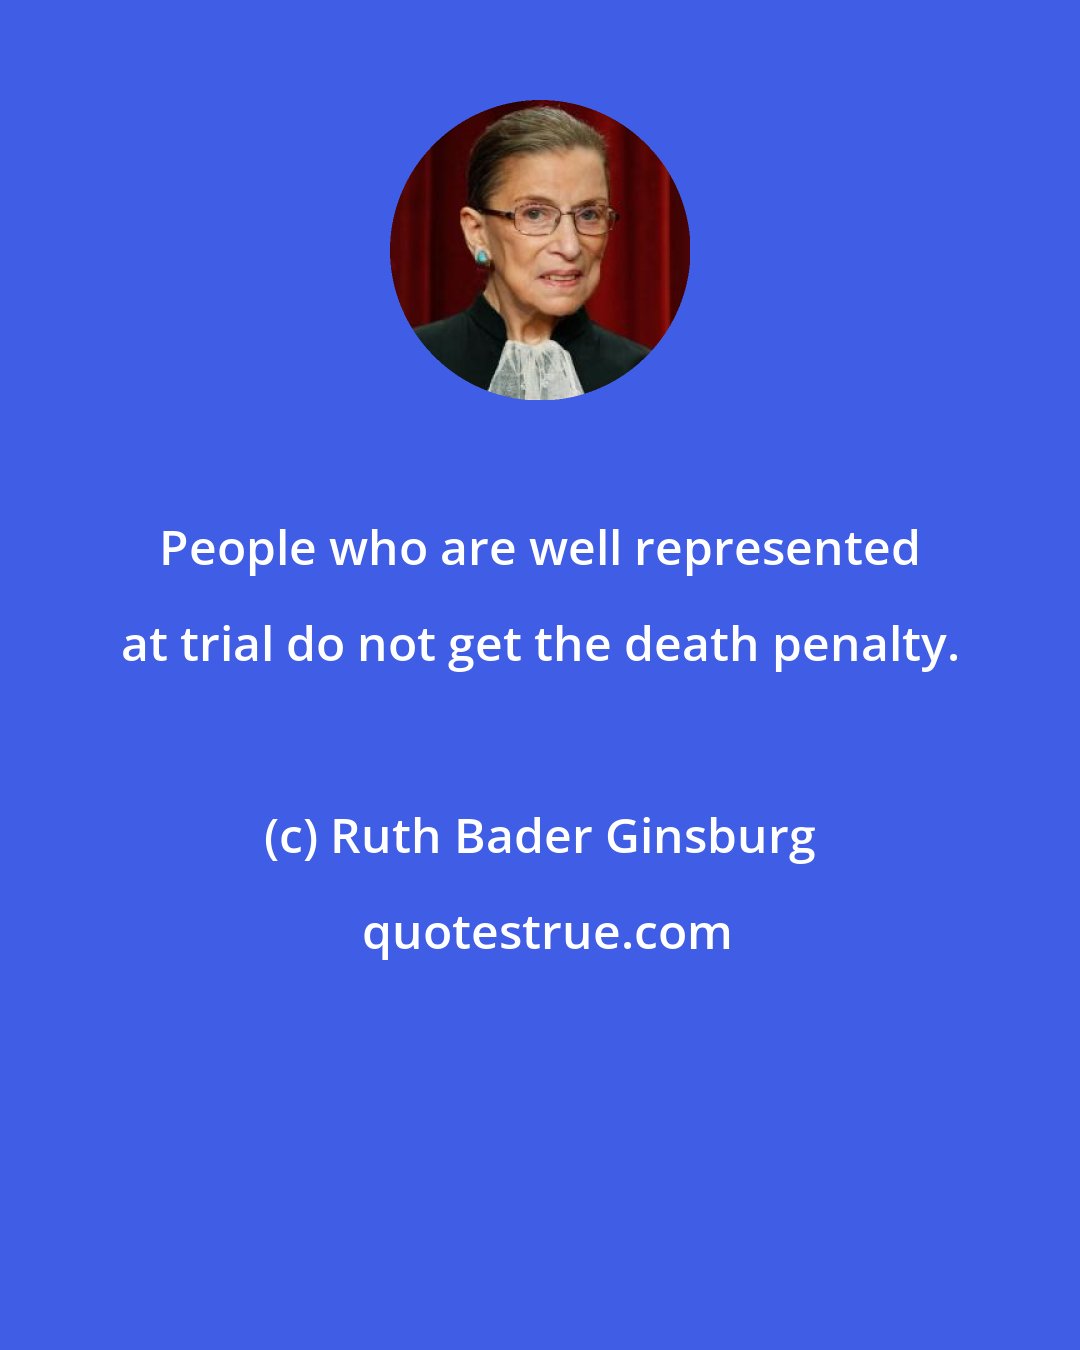 Ruth Bader Ginsburg: People who are well represented at trial do not get the death penalty.